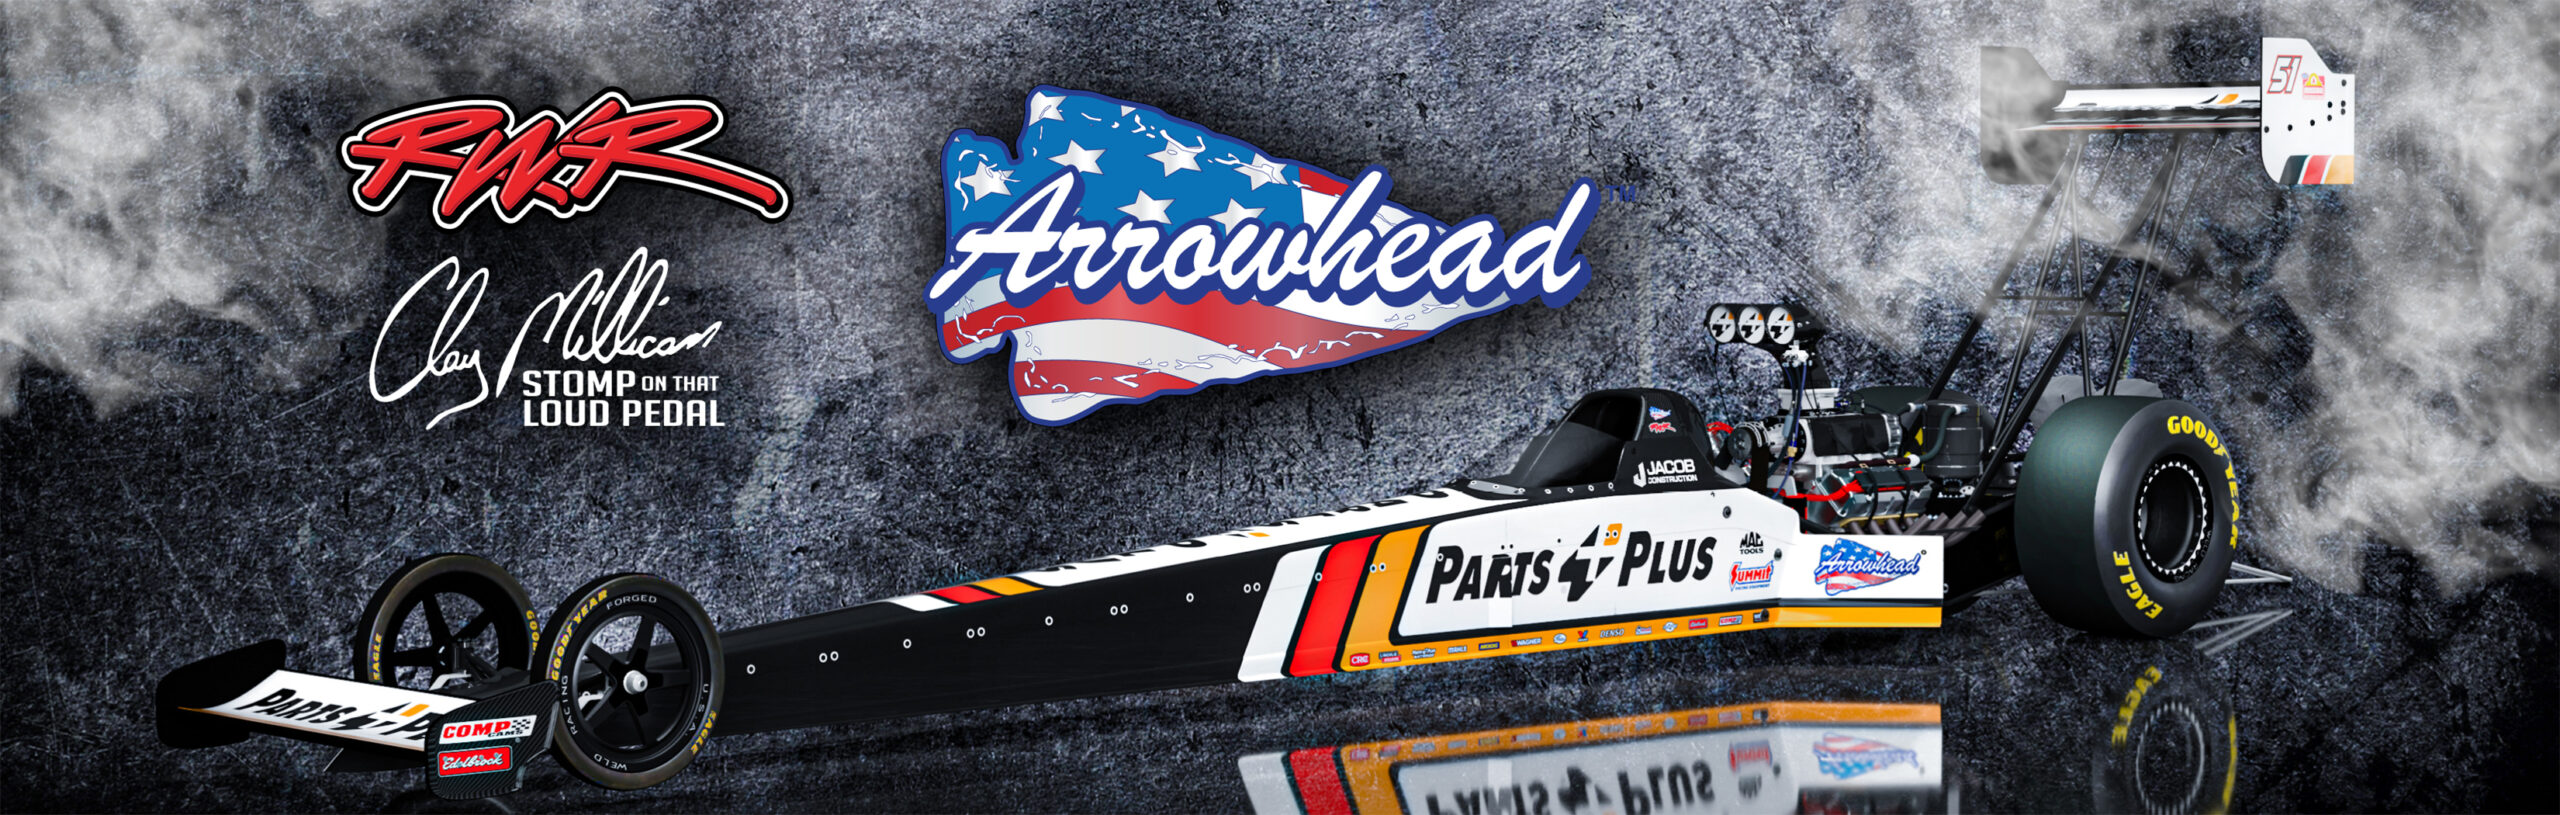 Arrowhead Brass Partners With RWR in NHRATop Plumbing, Irrigation Products Brand Makes Drag Racing Debut in 2024